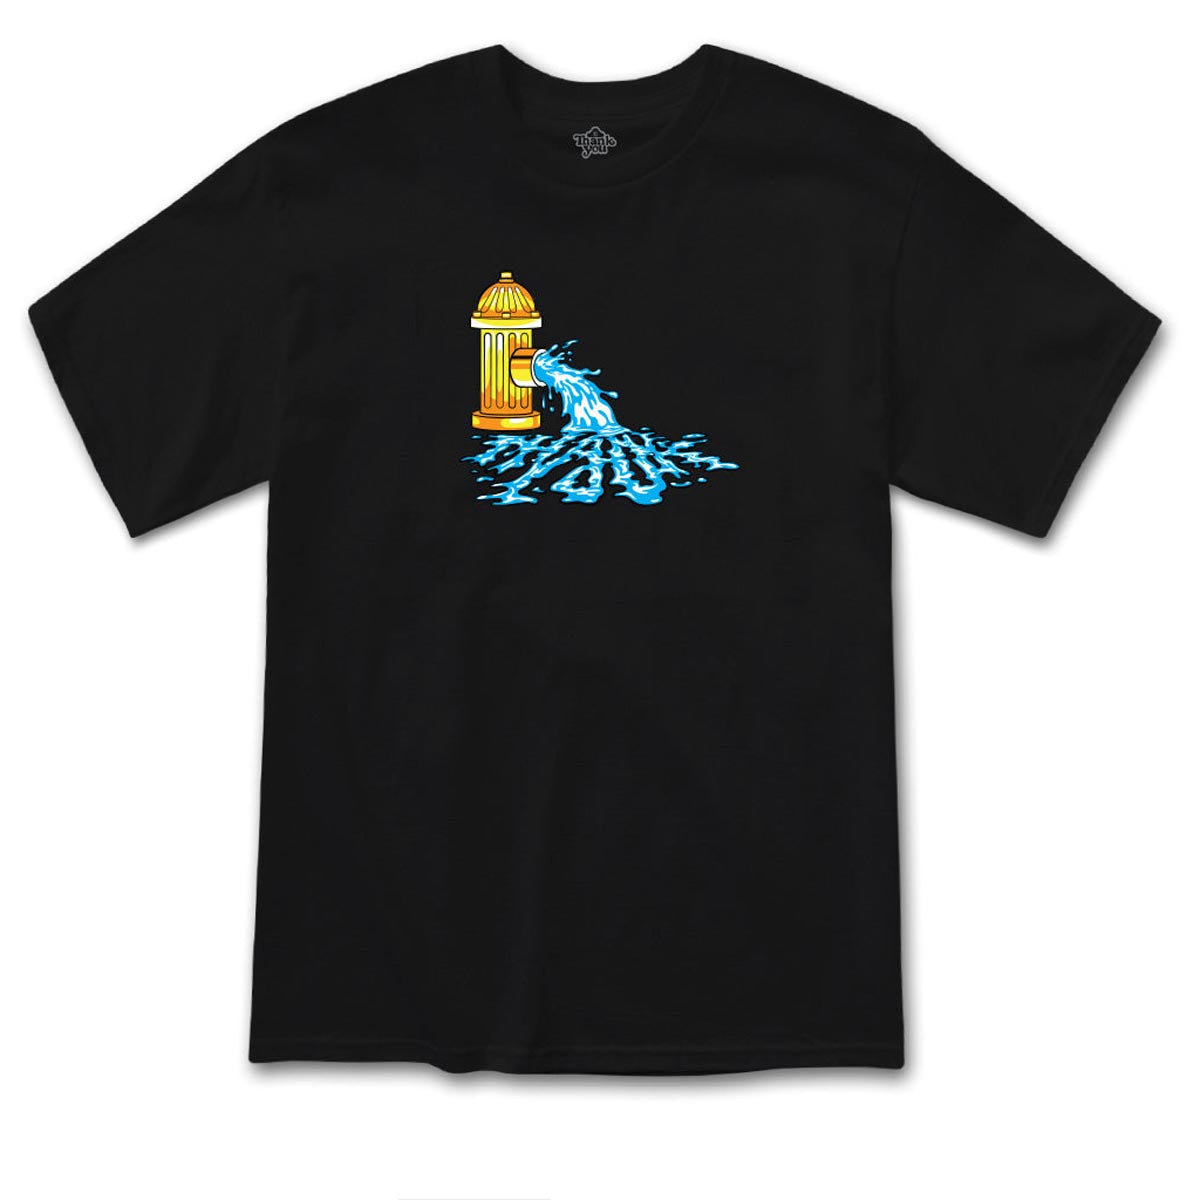 Thank You Fire Hydrant T-Shirt - Black image 1